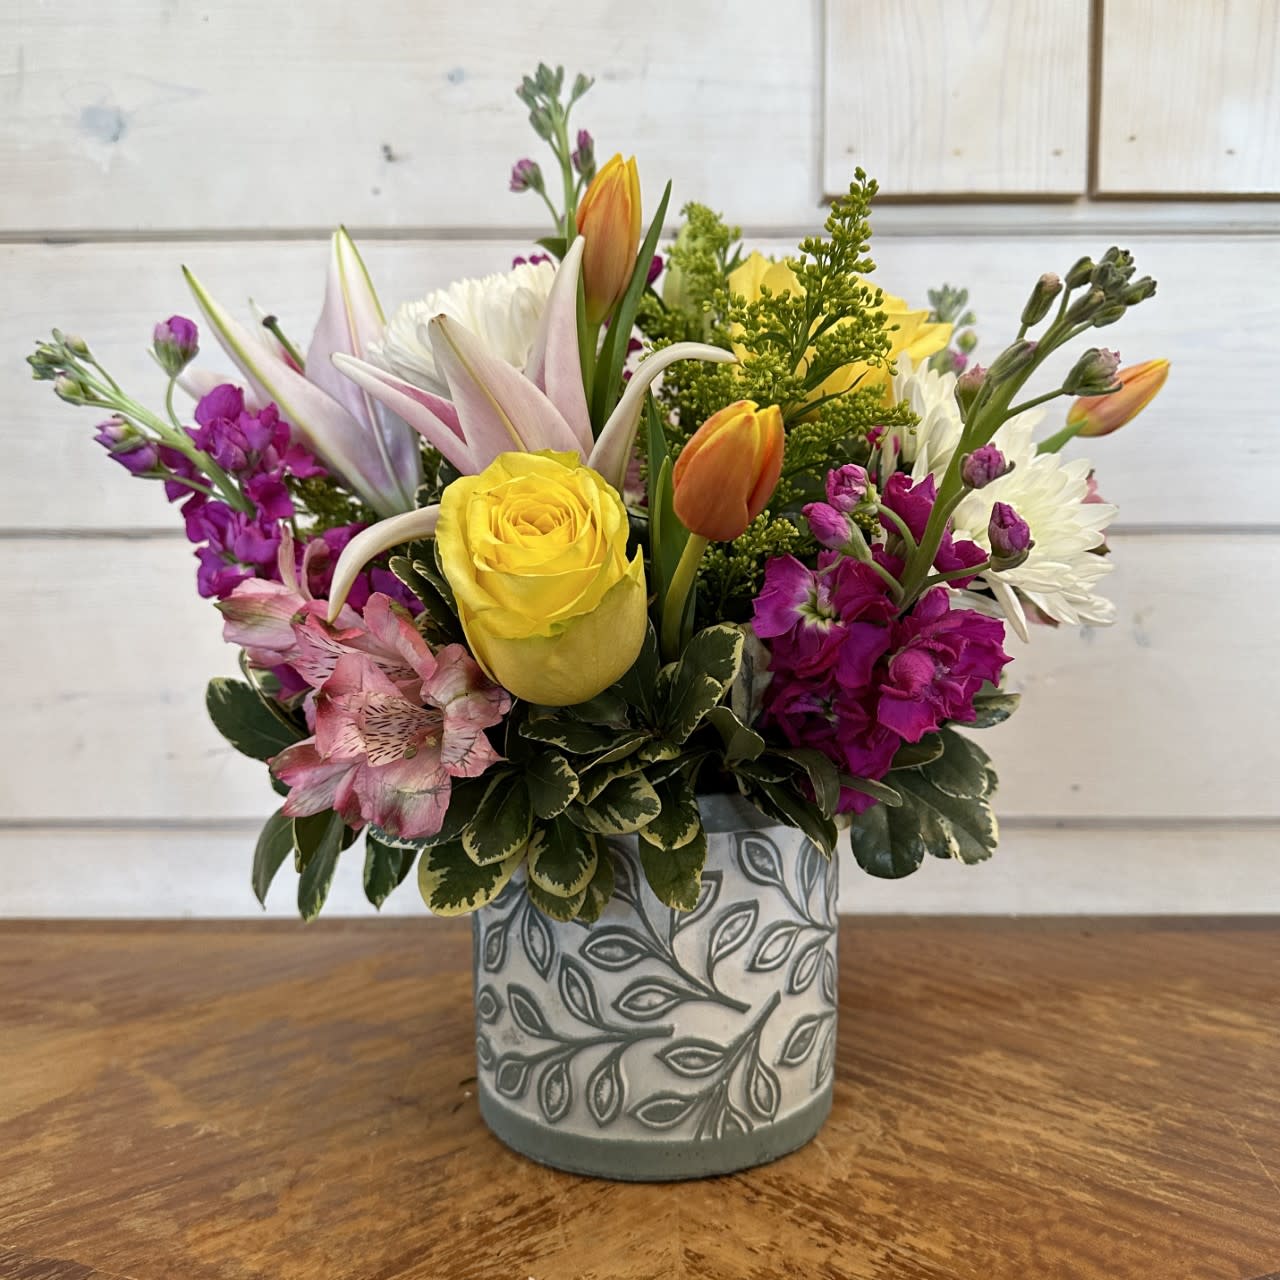 Happy Day Bouquet  - Yellow roses, stargazer lily, magenta stock, white chrysanthemums, orange tulips, and pink alstroemeria arranged in a medium laurel leaf cement pot with solidago. Approximately 12in tall and 12 in wide.  